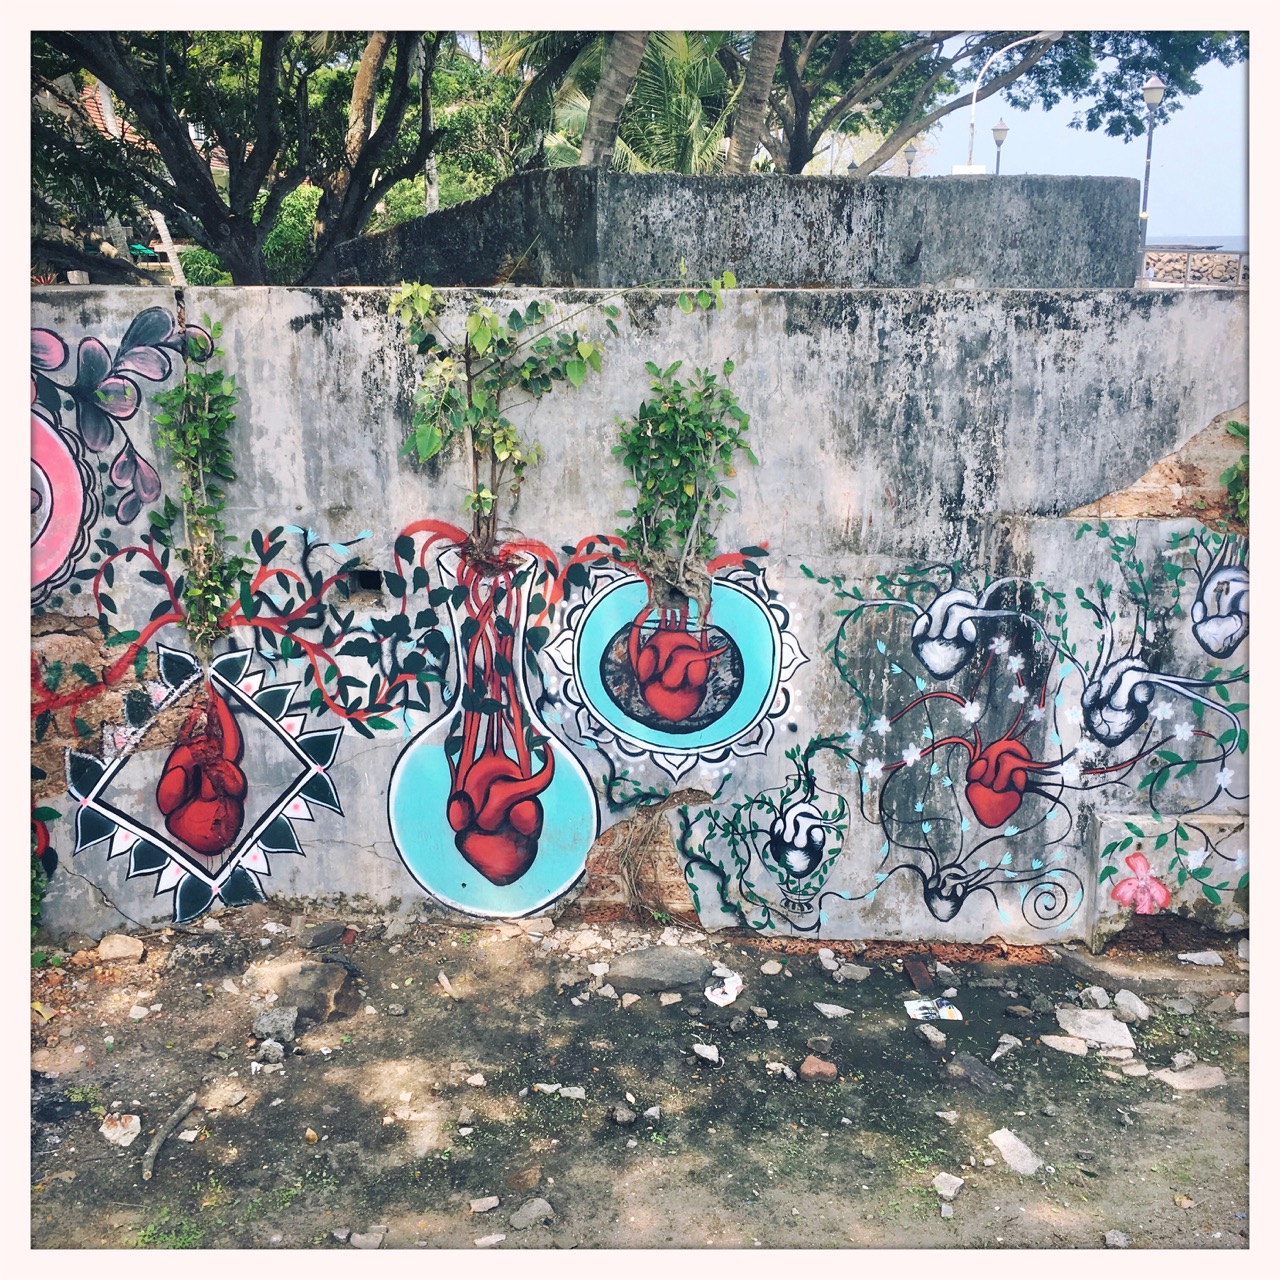 Out and about in Fort Kochi